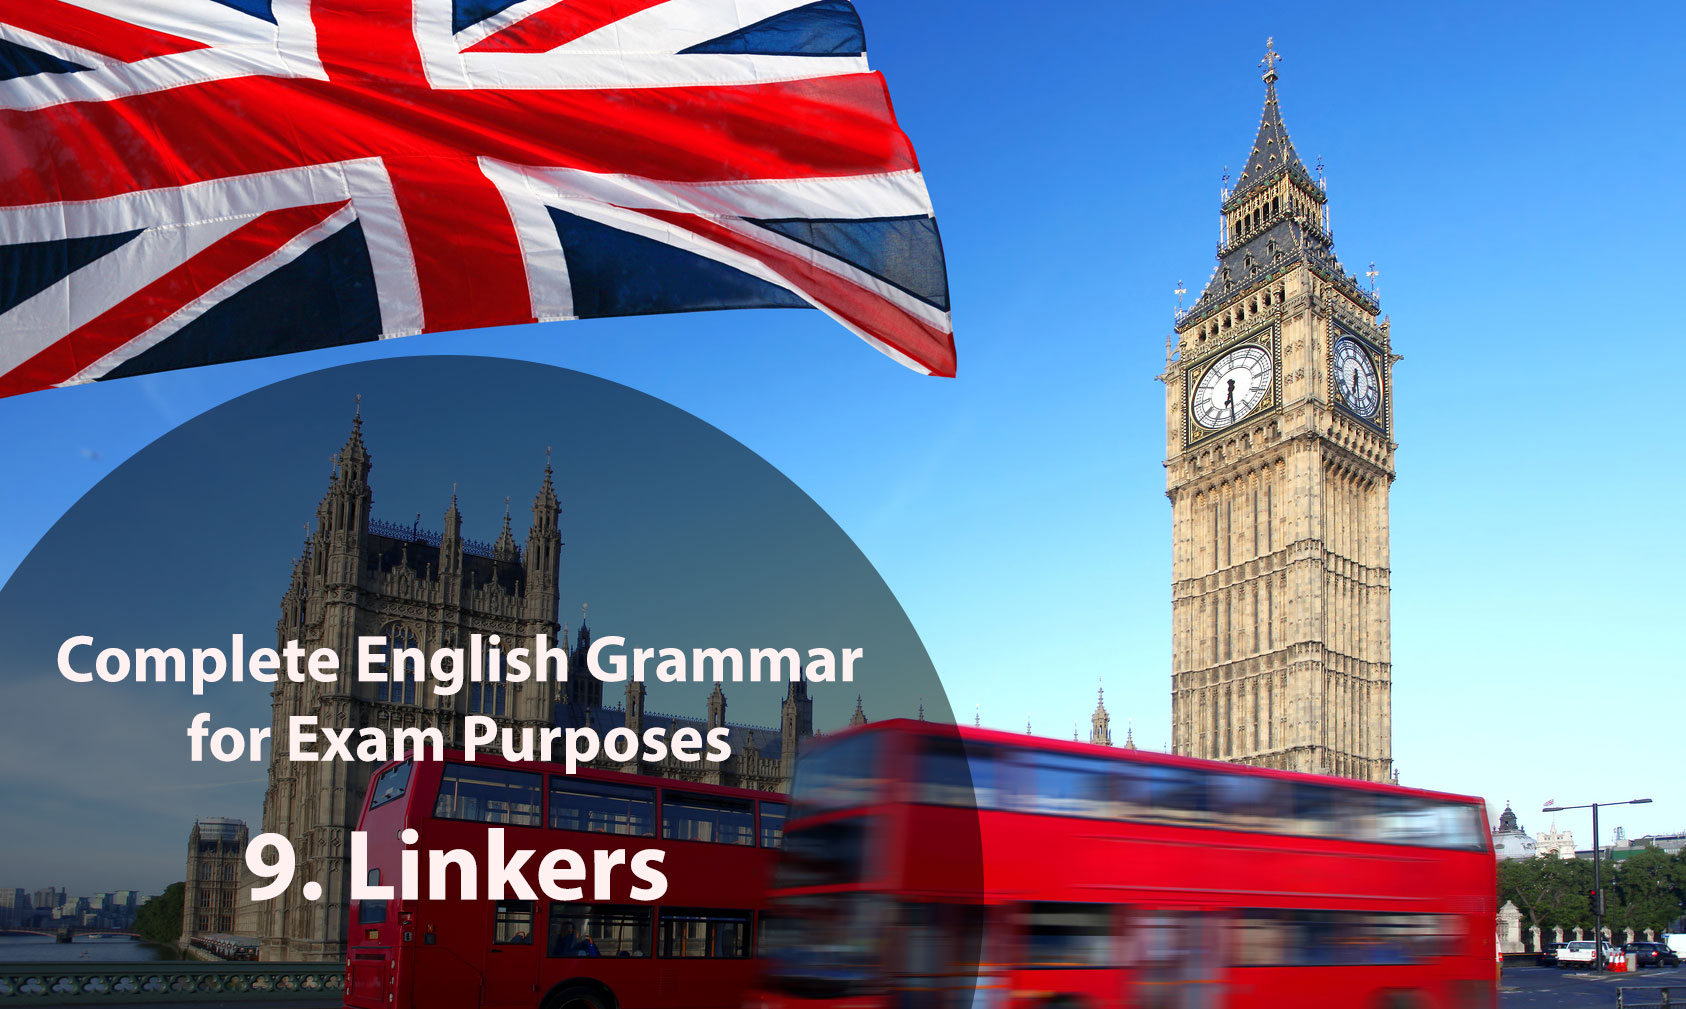 Complete English Grammar Part 9: Linkers (Adverbial Clauses)